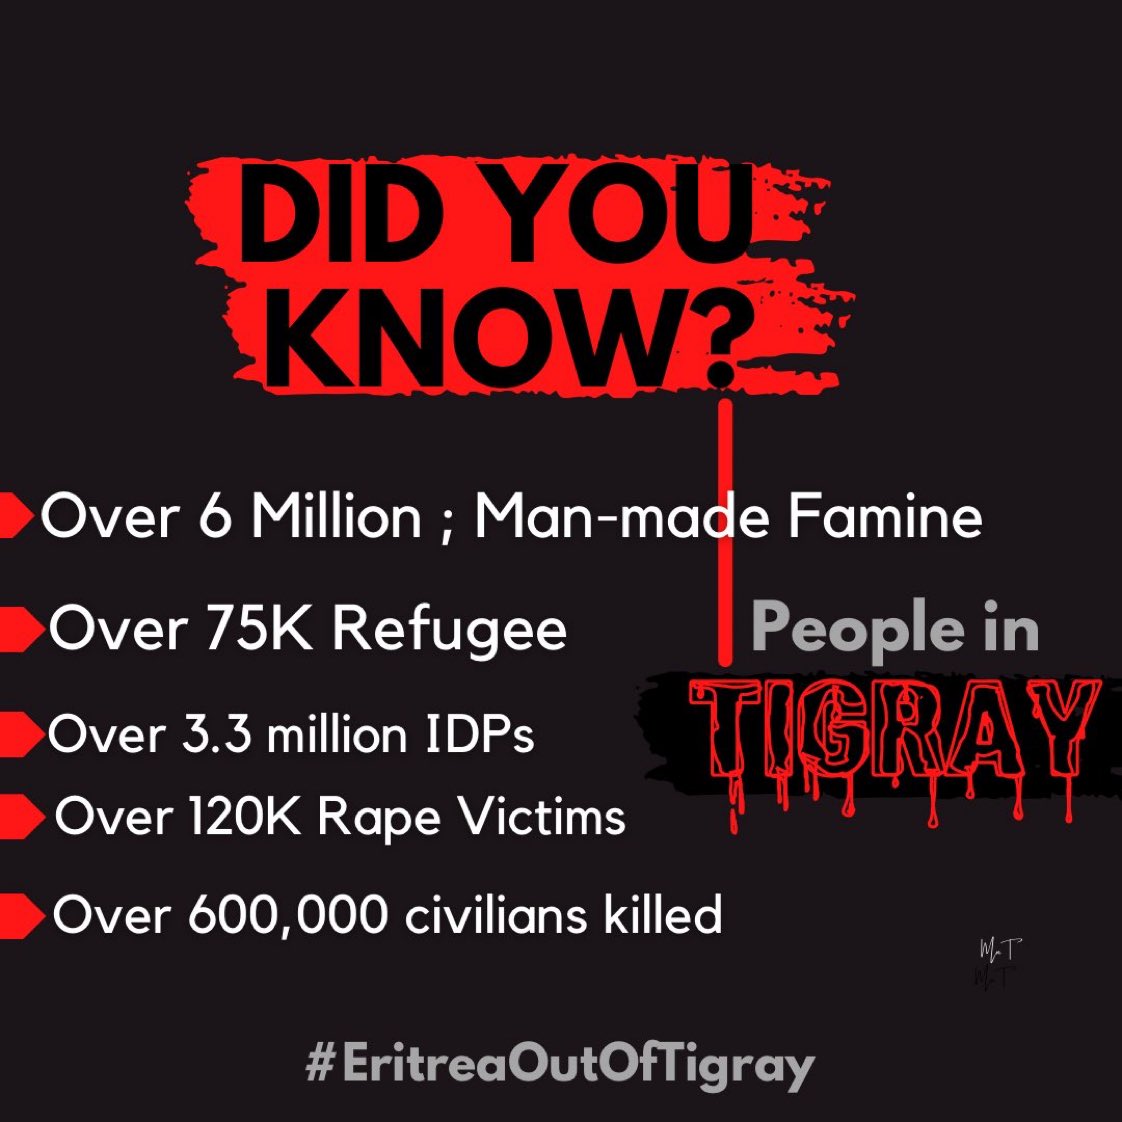 The Tigray inquiry is a clear departure from the @ACHPR previous commitment to accountability and represents a missed opportunity to ensure perpetrators are not continuing abuses with impunity.
#Justice4TigrayPeople @IntlCrimCourt @UN_HRC @vonderleyen @SFRCdems @SenateForeign a/